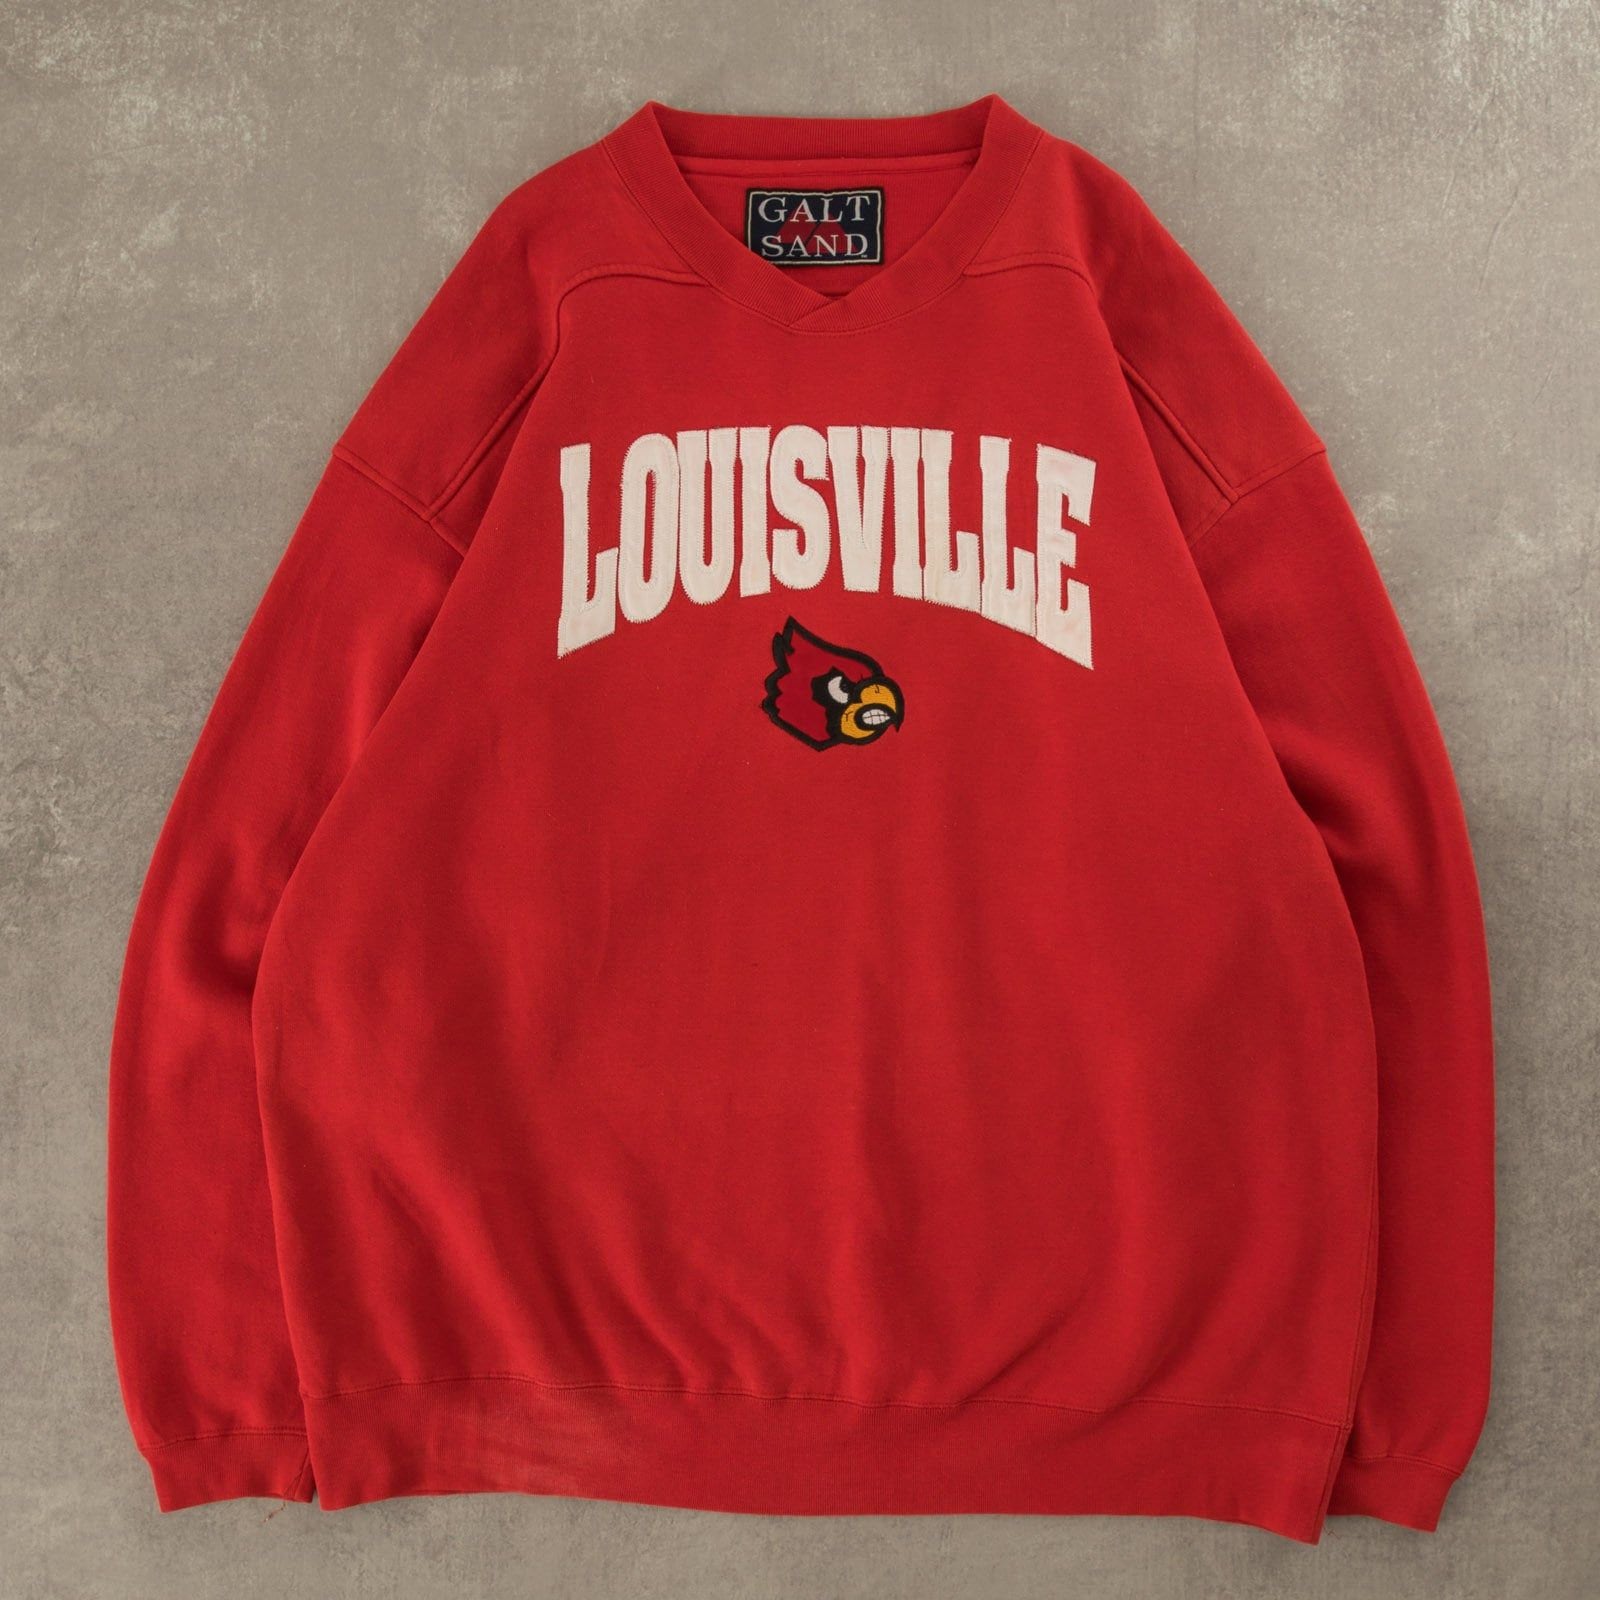 University of Louisville, Cardinals, One of a KIND Vintage Sweatshirt with  Crystal Star Design